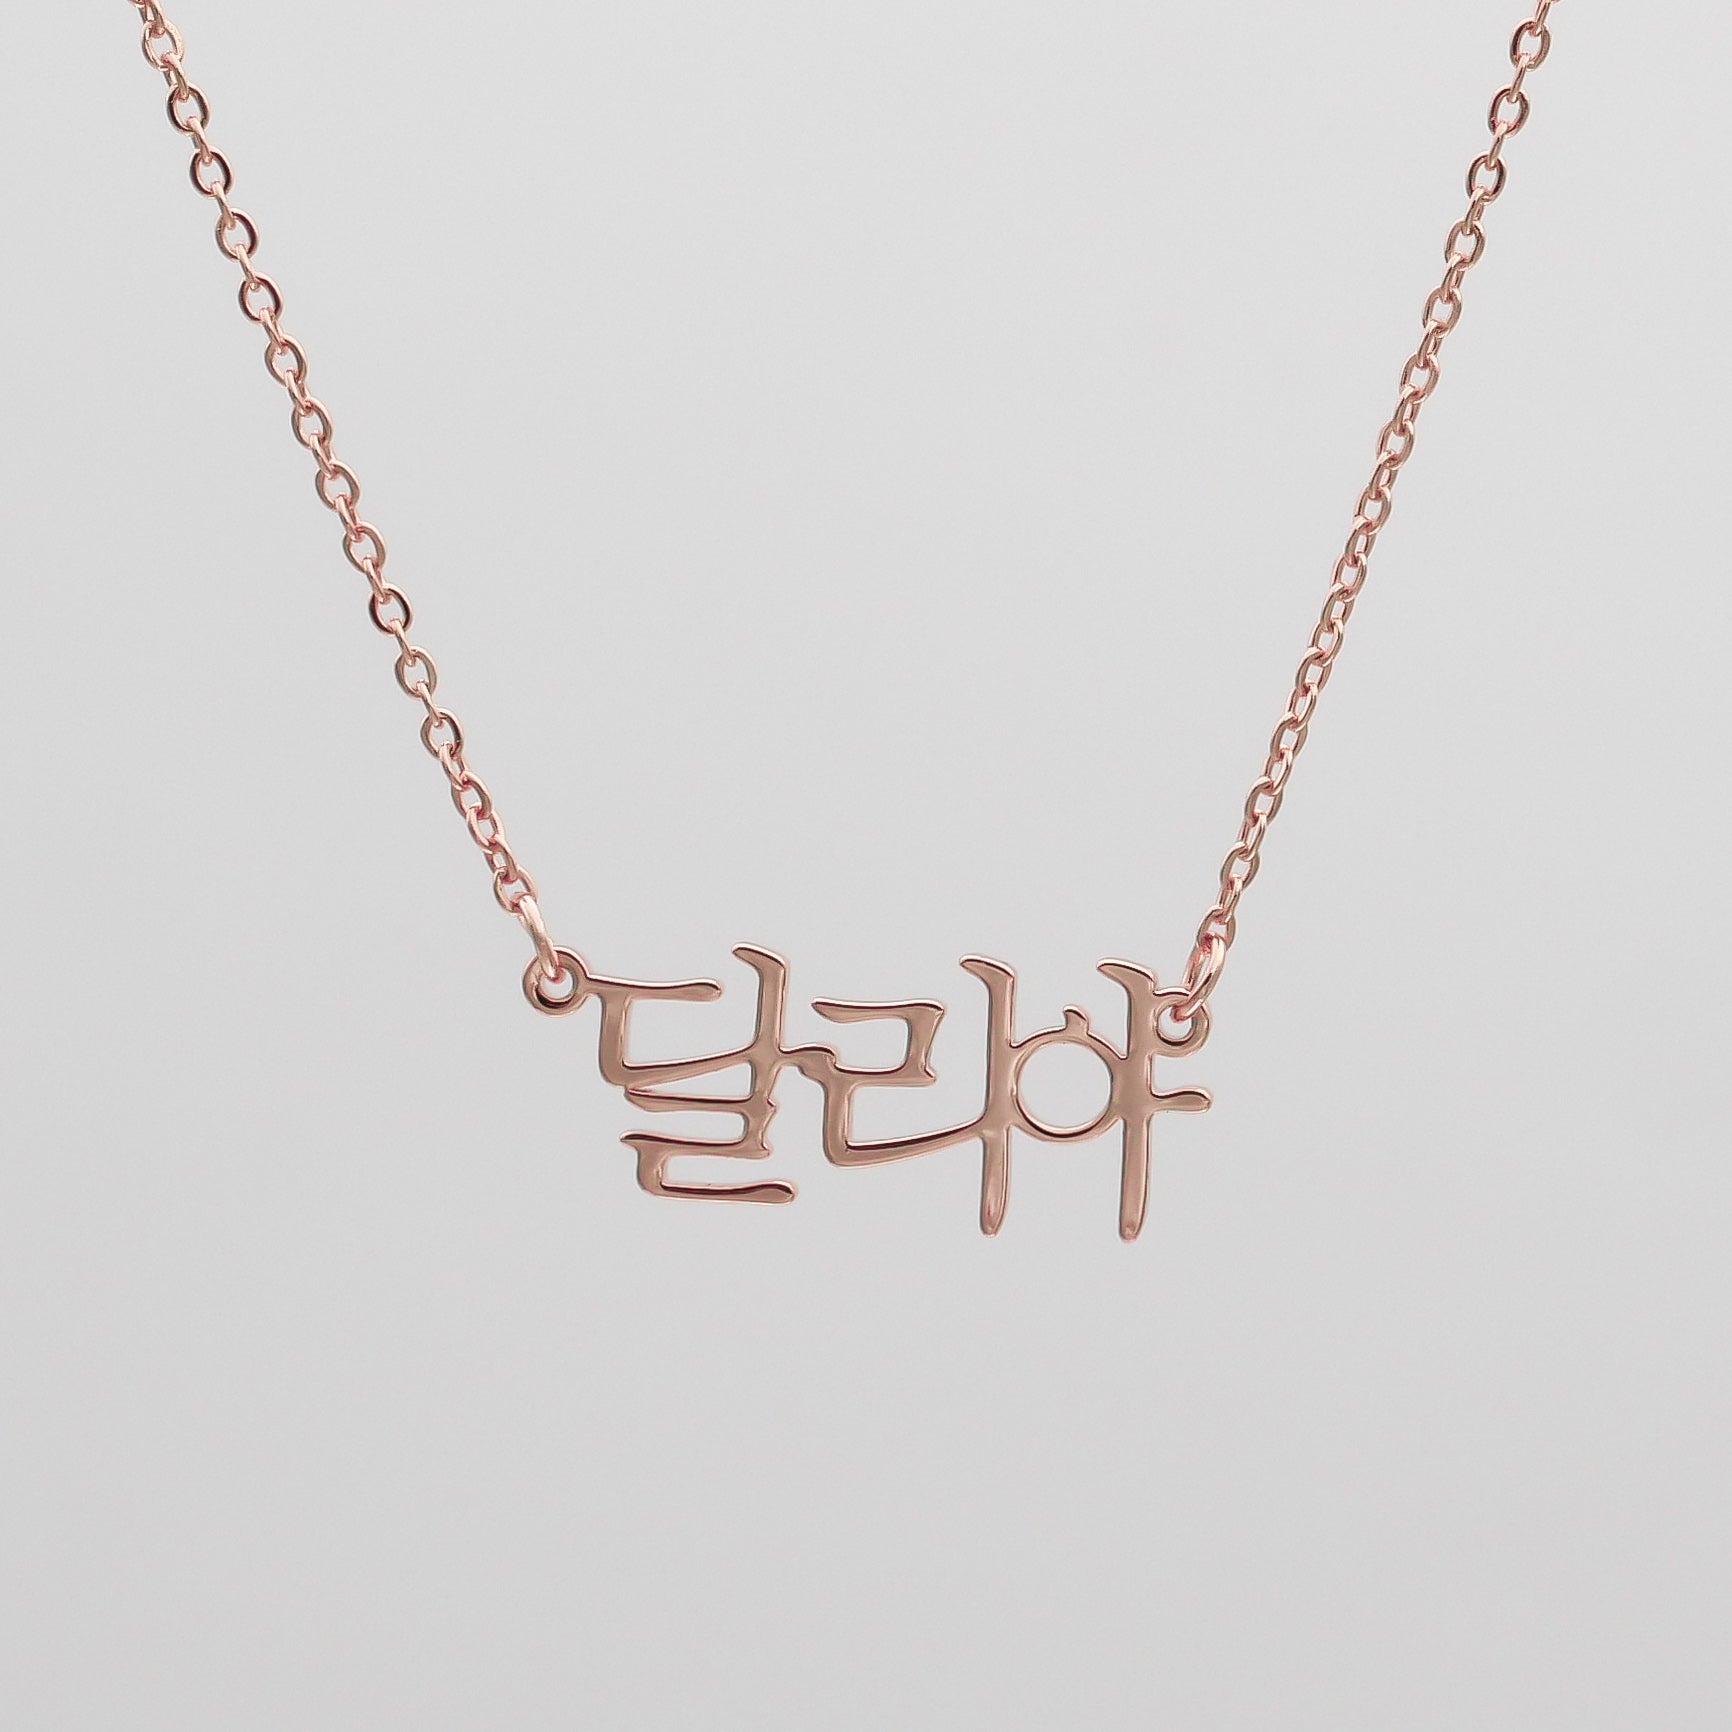 Gold Korean Name Necklace on a traditional link chain